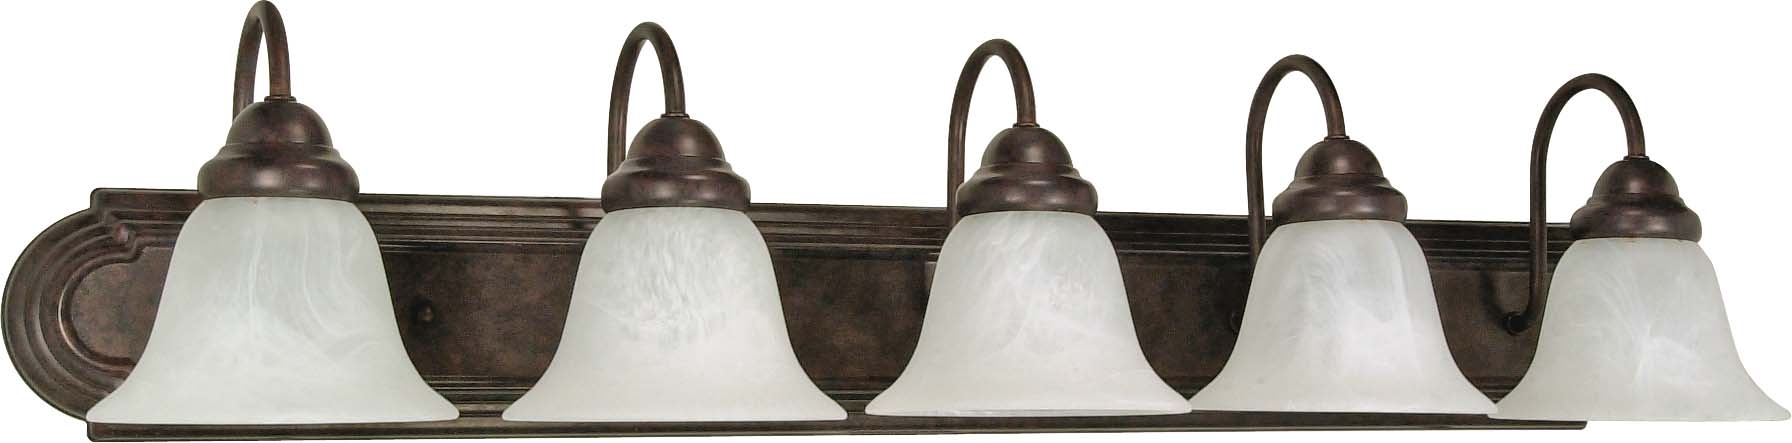 SATCO/NUVO Ballerina 5-Light 36 Inch Vanity With Alabaster Glass Bell Shades (60-327)